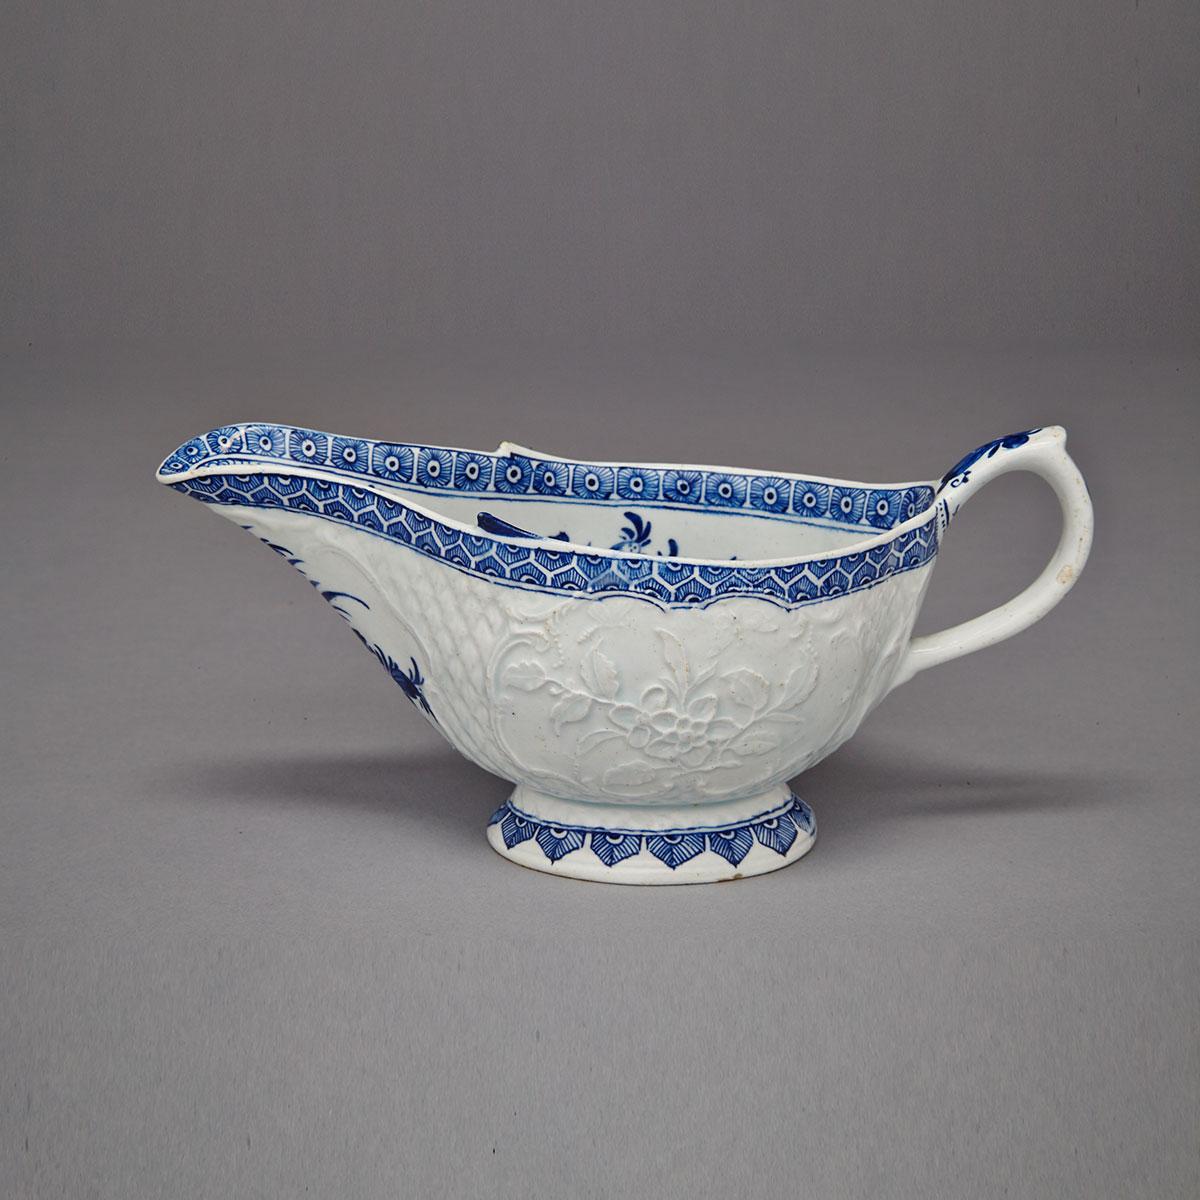 Bow Blue and White Sauceboat, c.1765